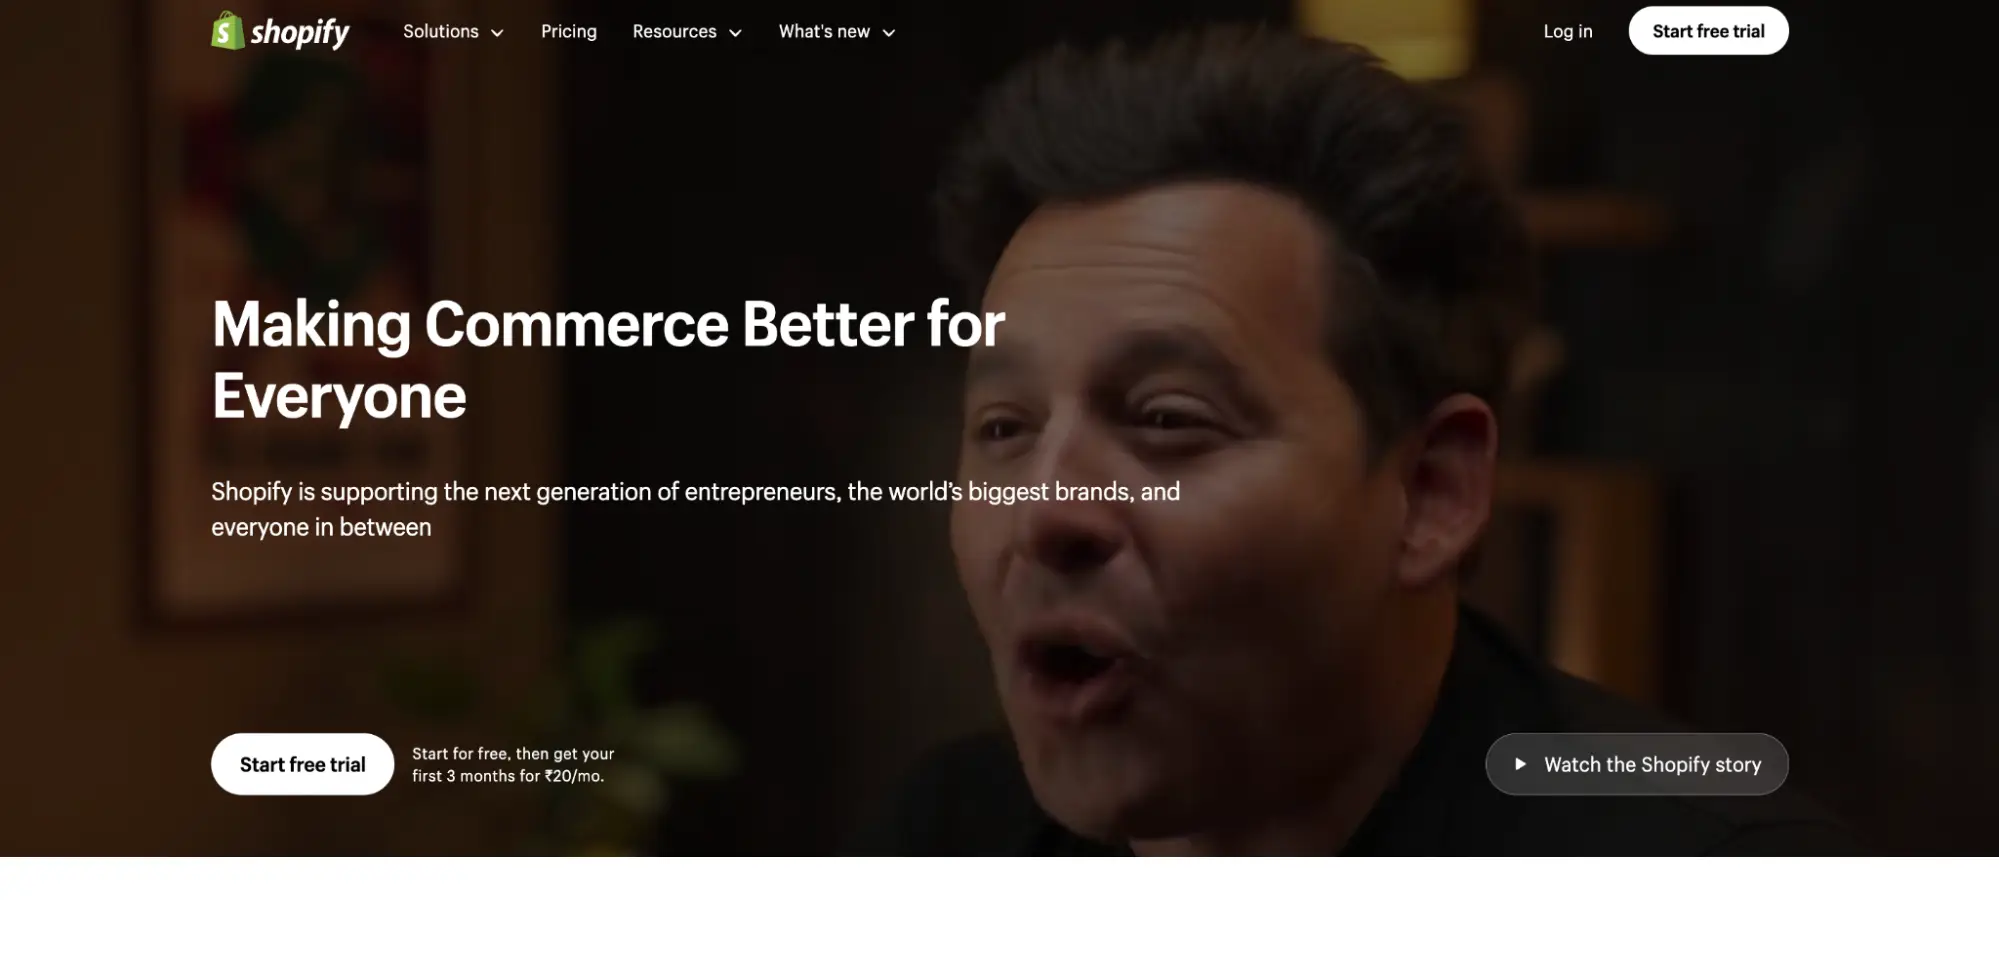 Shopify's user-friendly interface aids online merchants in scaling their business